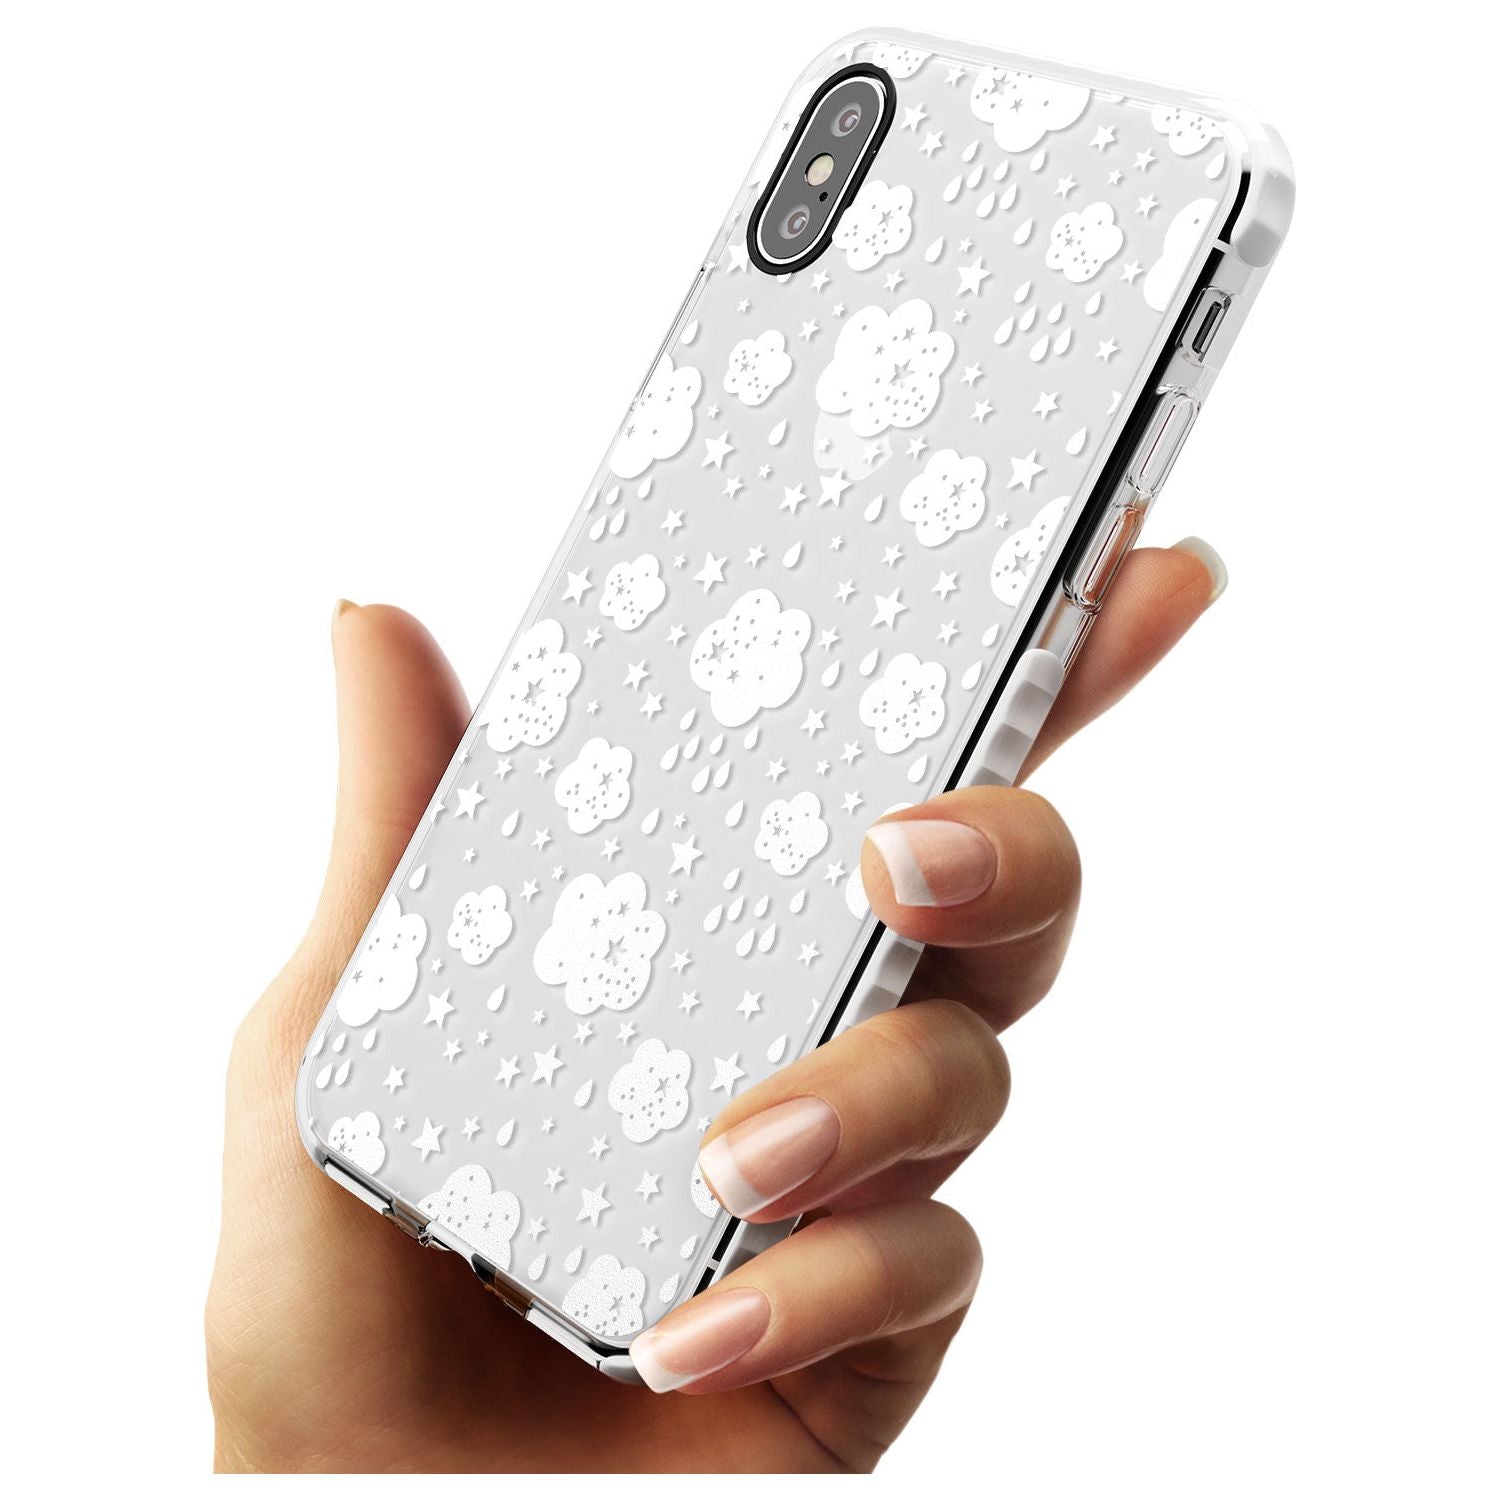 Rainy Days Impact Phone Case for iPhone X XS Max XR